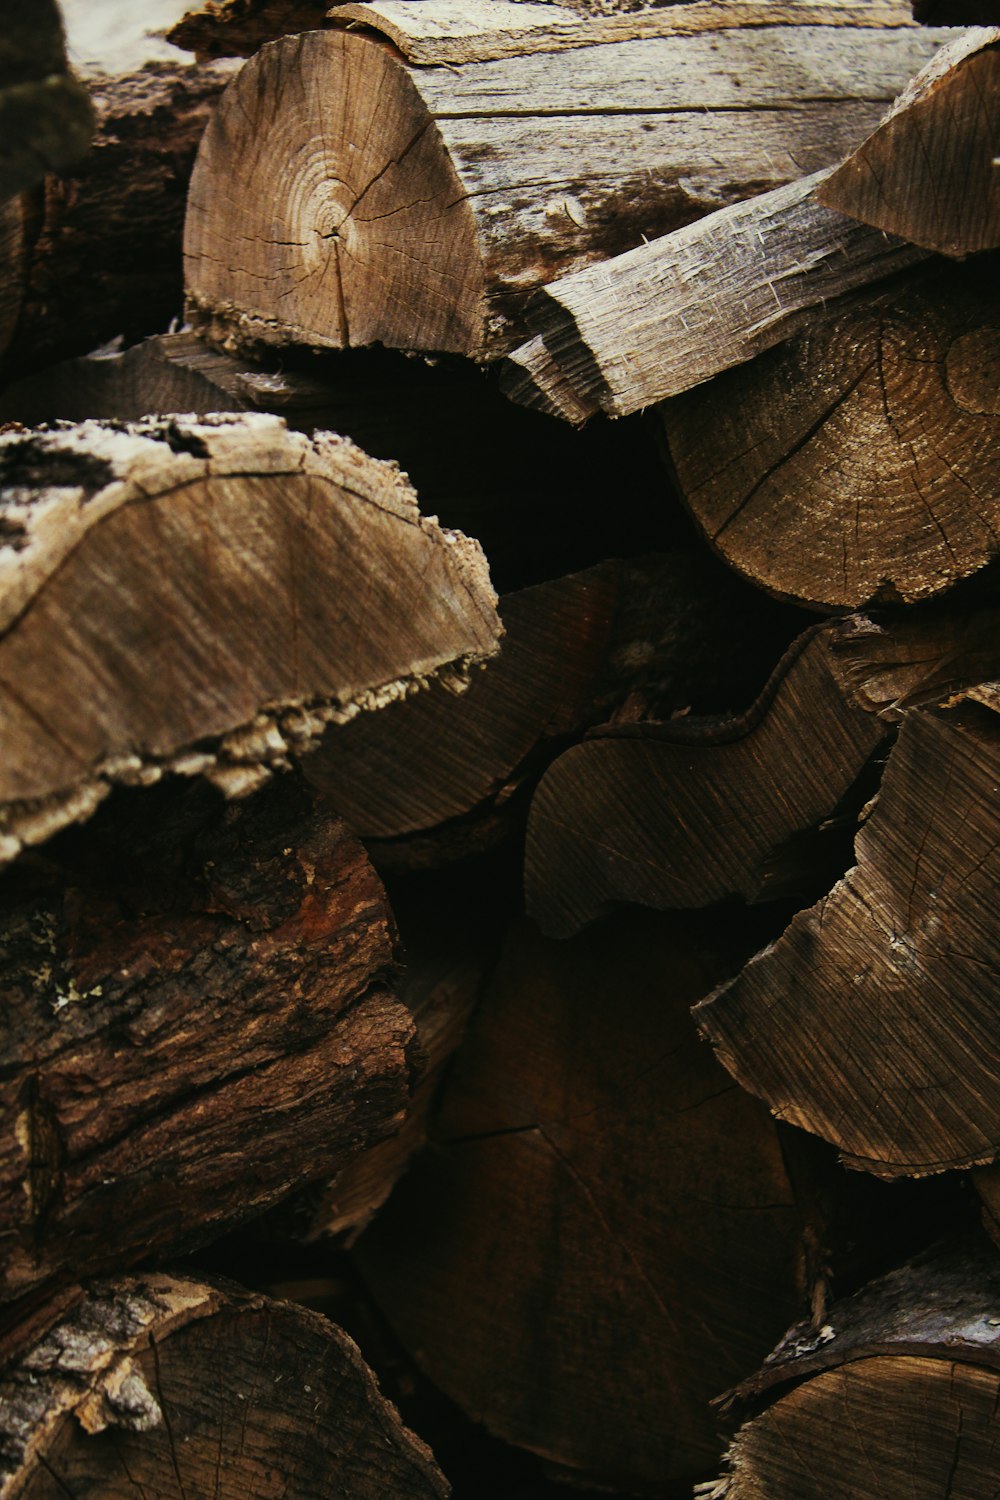 a close-up of some wood